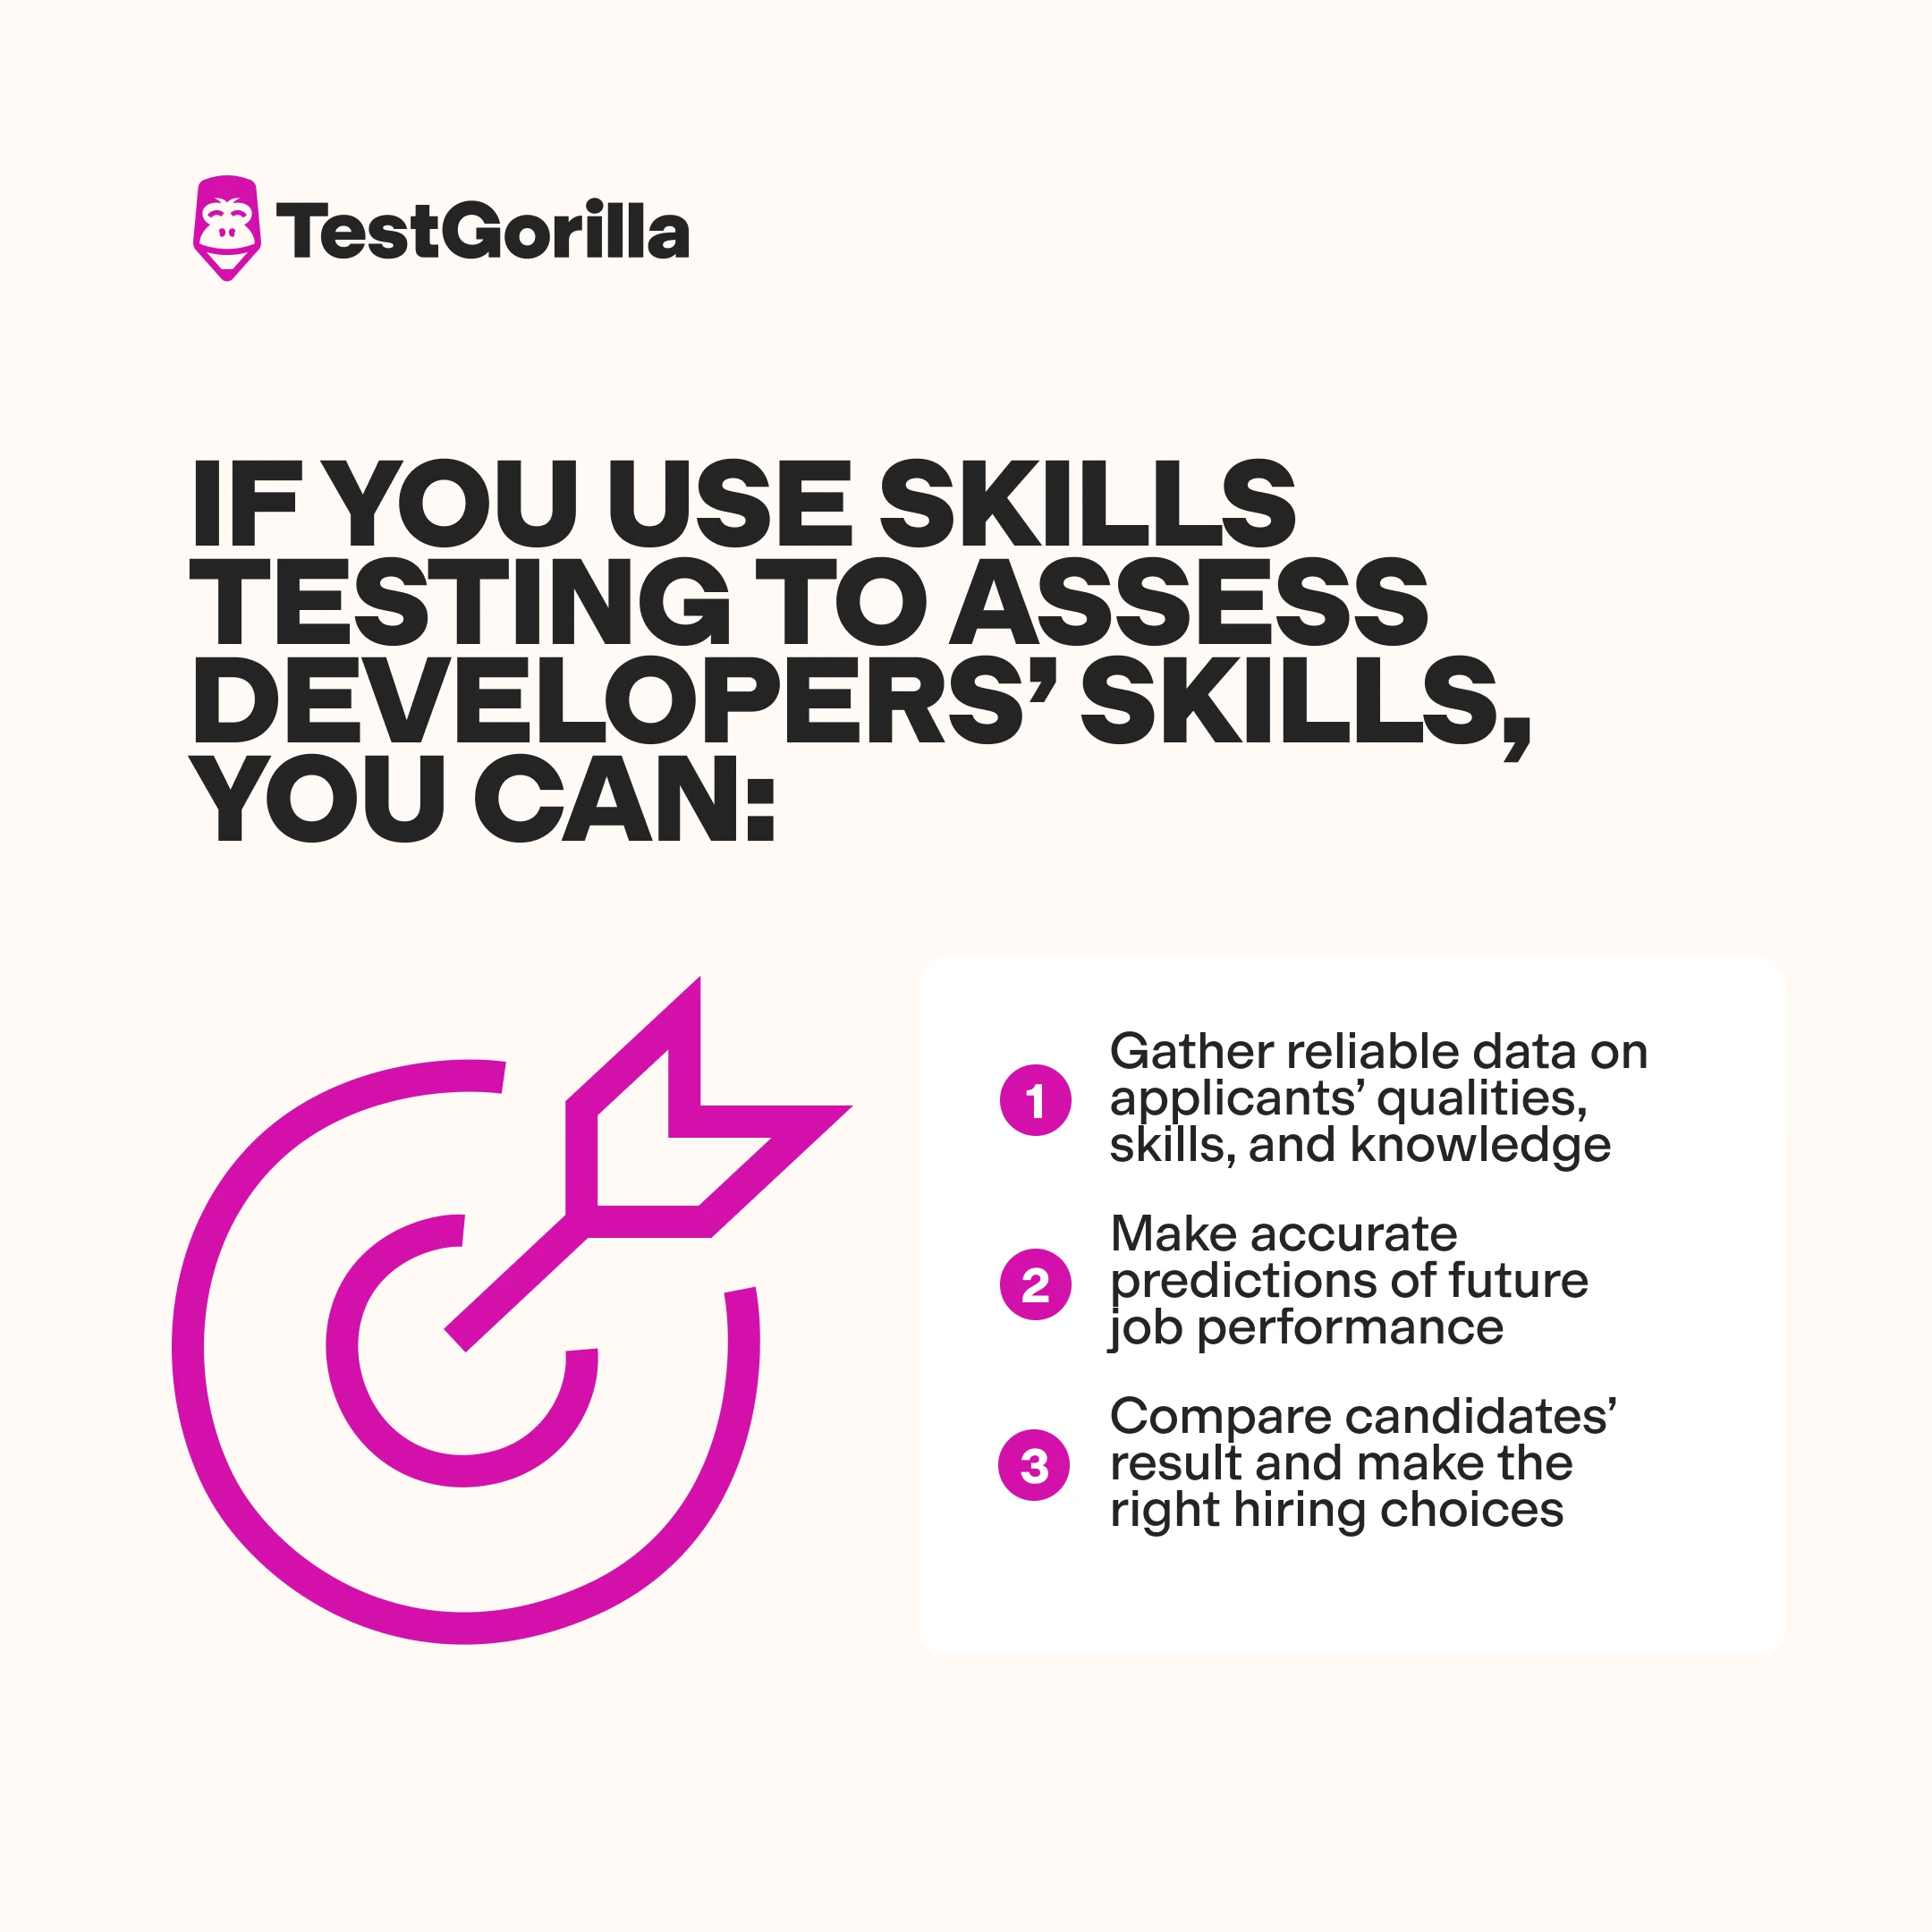 Why use skill testing to assess developers’ skills 